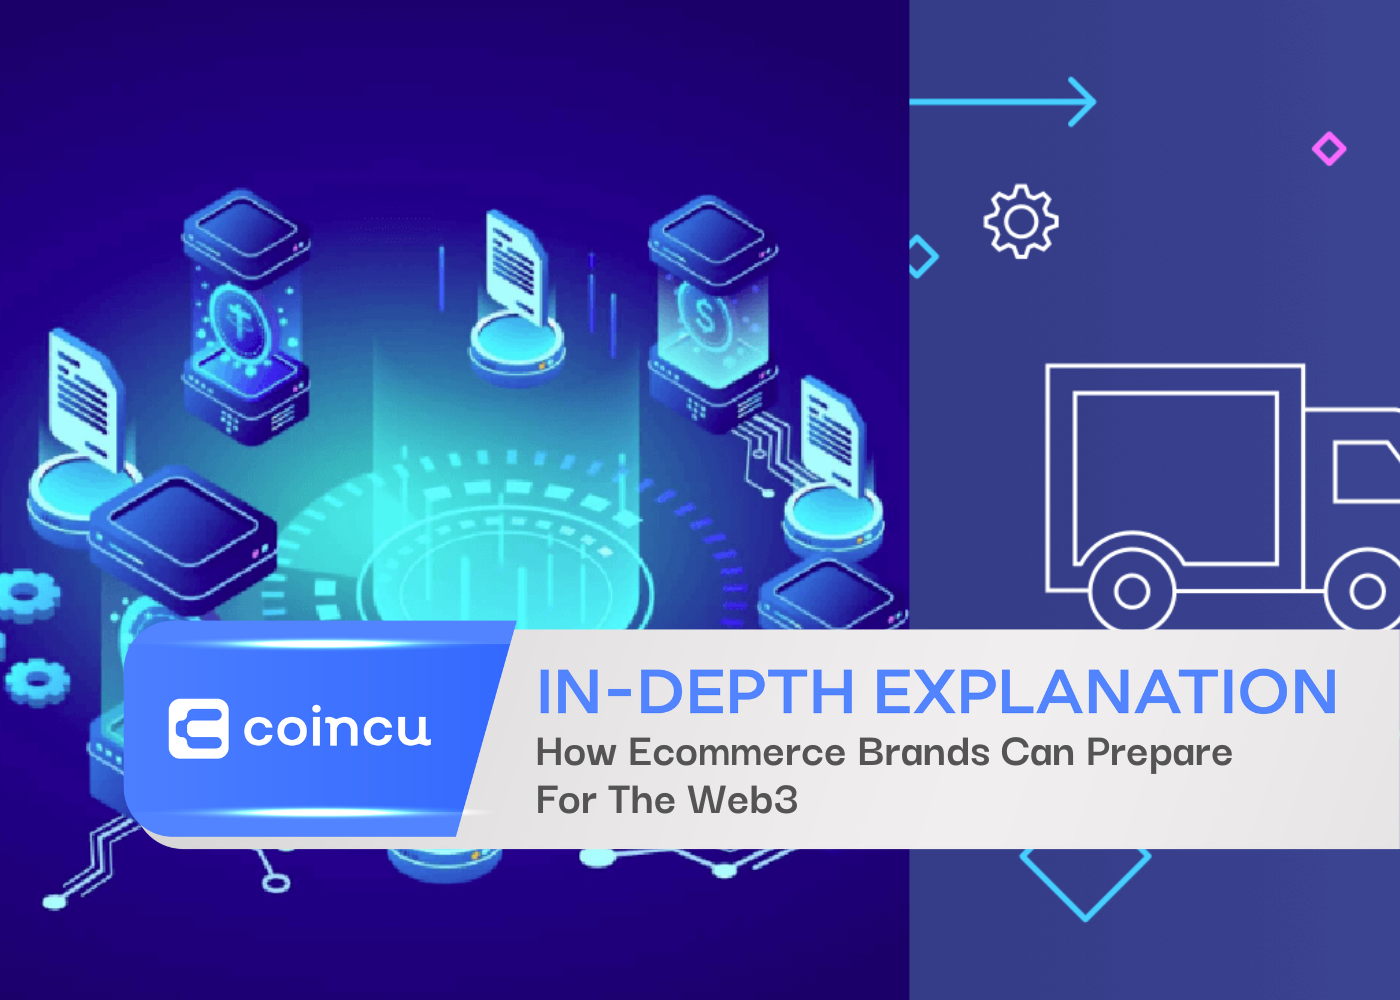 How Ecommerce Brands Can Prepare For The Web3